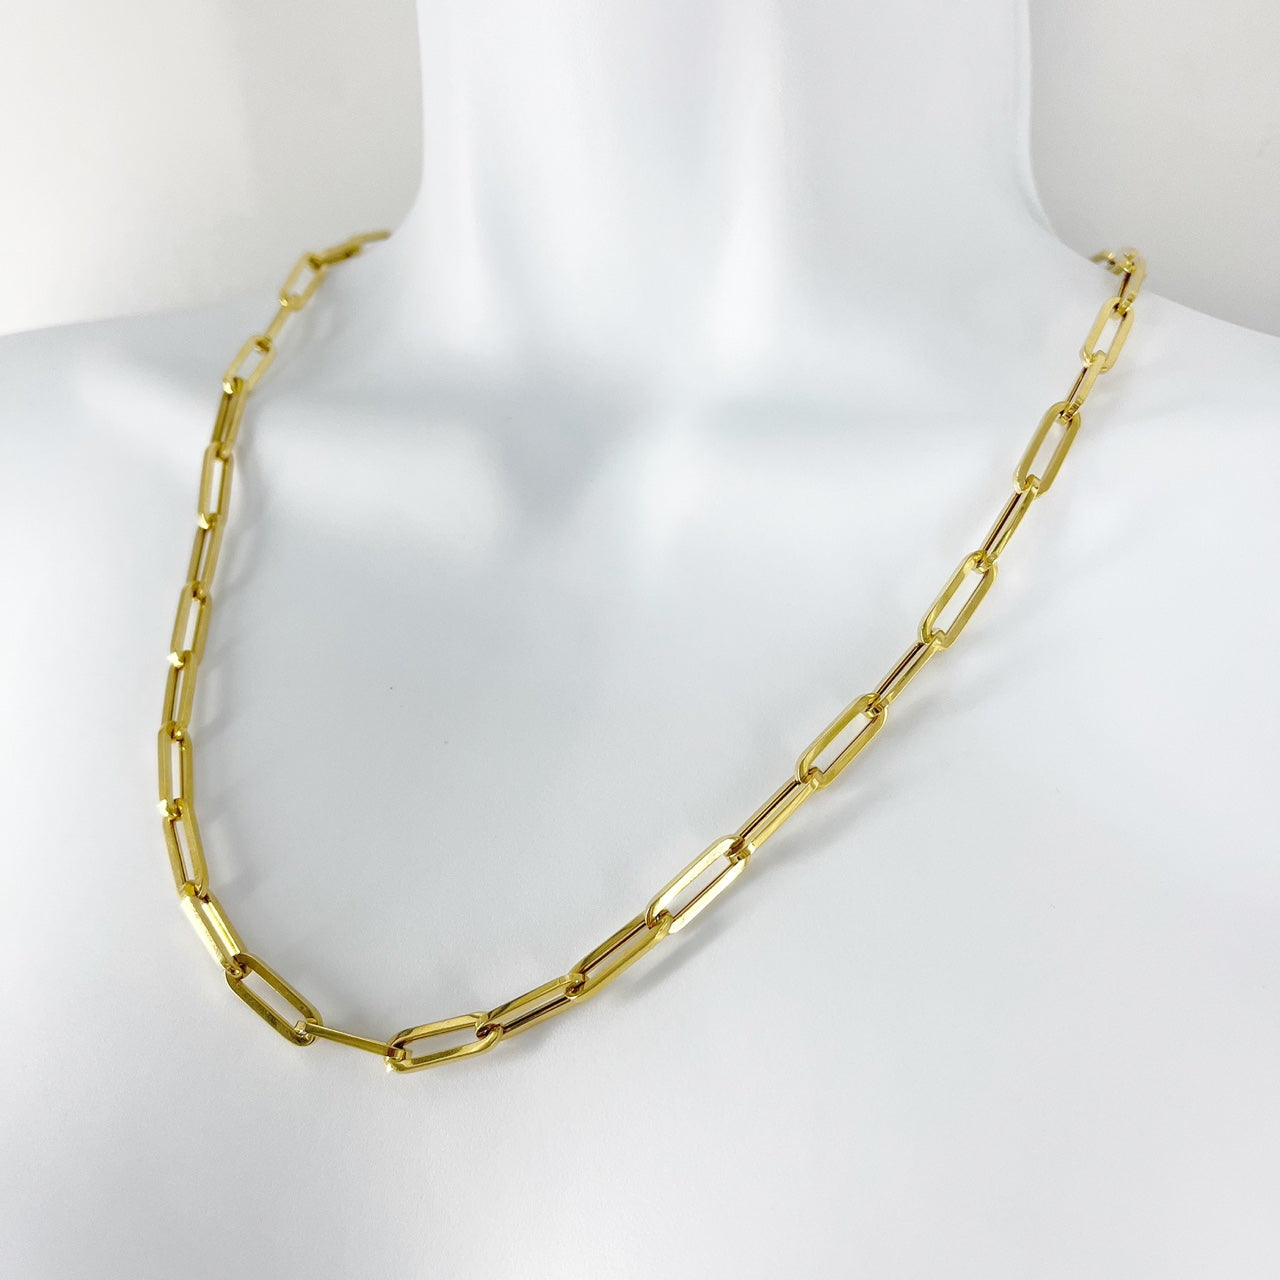 14k Solid yellow Gold Paperclip Chain Necklace 22"[14K Solid Gold]